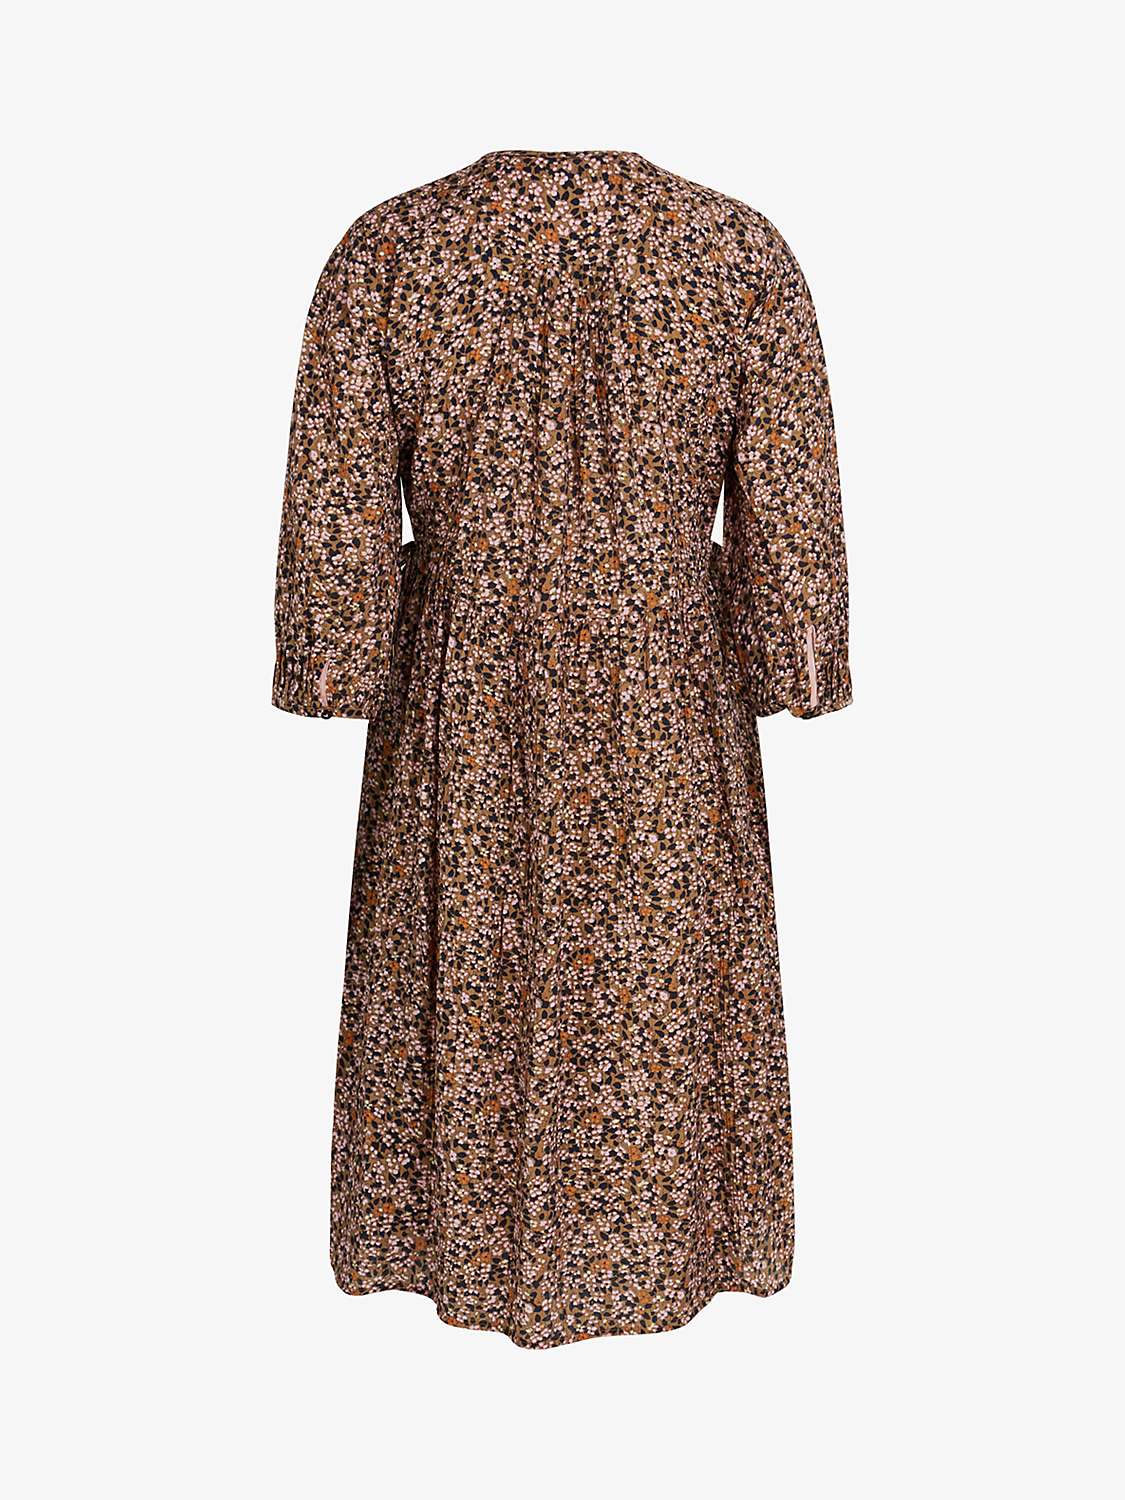 Buy Noa Noa Camille Ditsy Floral Print Midi Wrap Dress, Navy/Brown Online at johnlewis.com